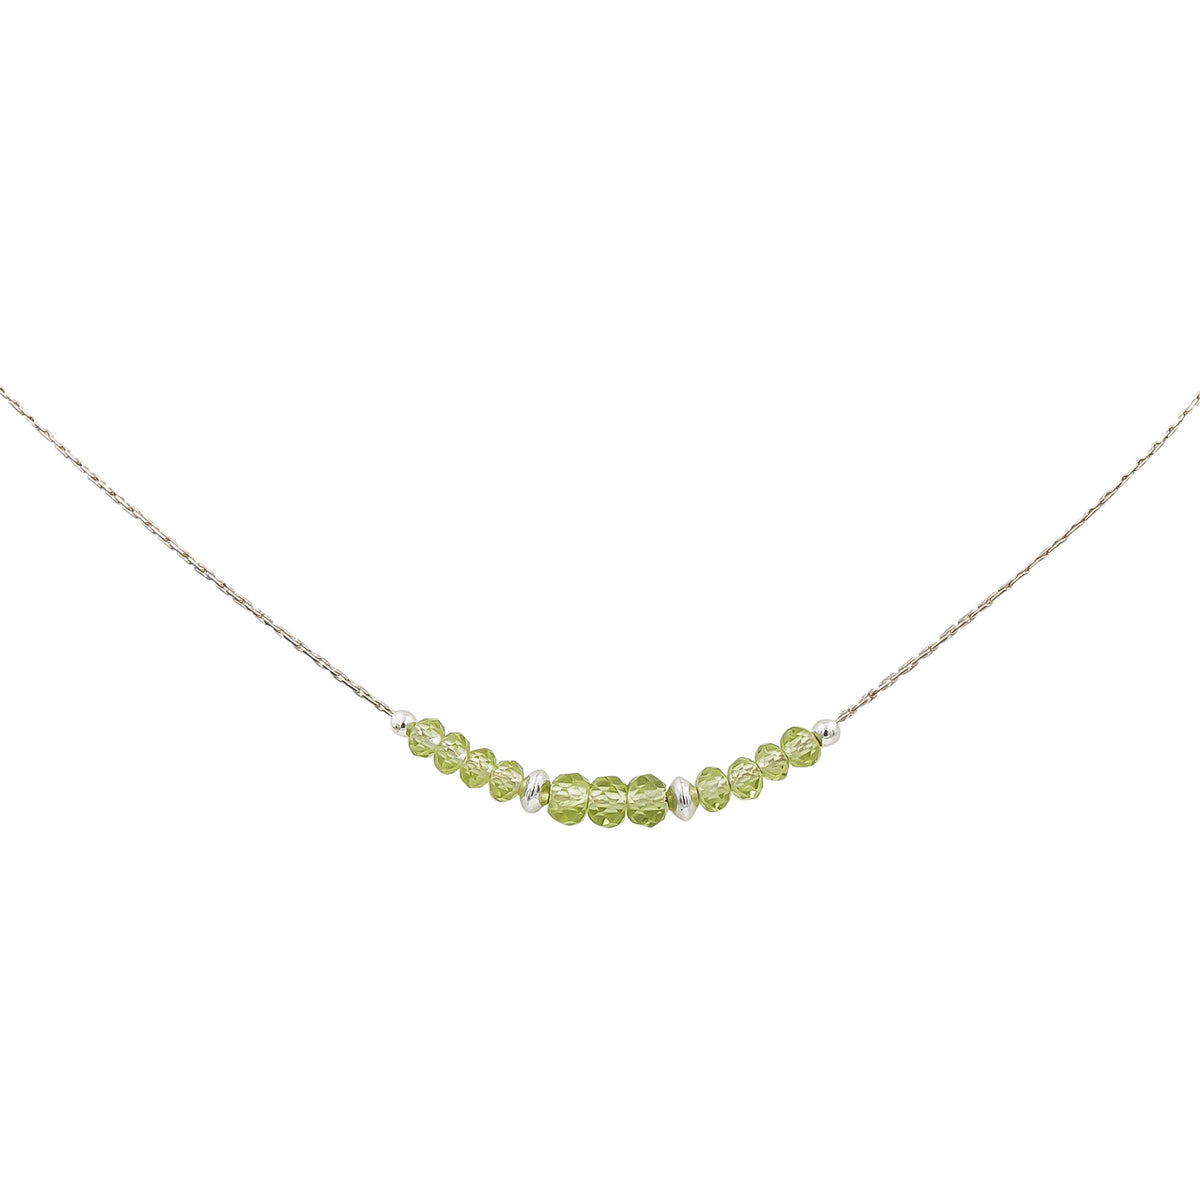 Earth Song Jewelry ~ Peridot stones twinkle and sparkle on this bright green necklace